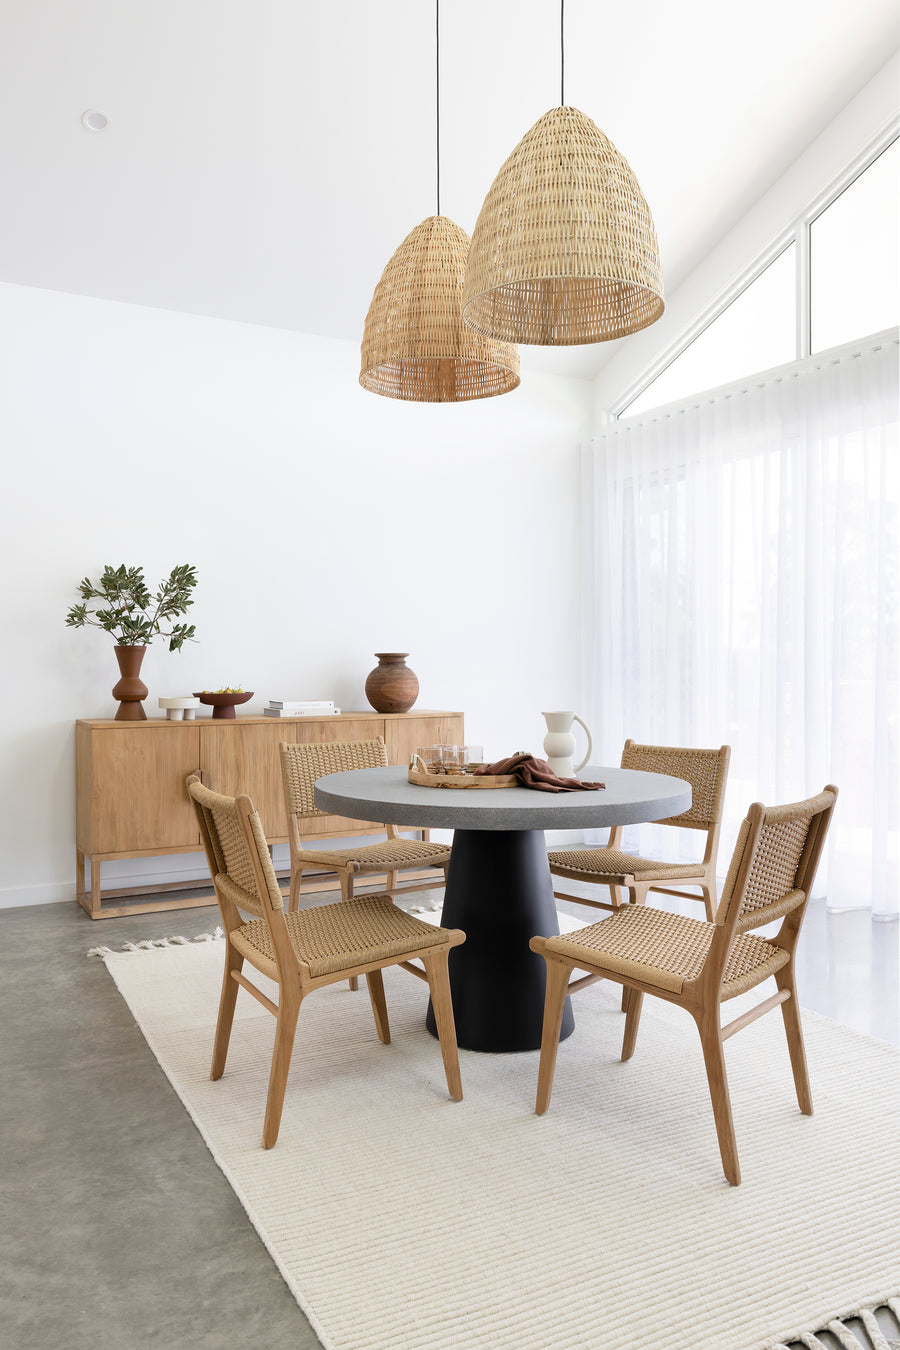 1.4m Avalon Round Dining Table | Speckled Grey with Black Metal Cone Base - www.elkstone.com.au